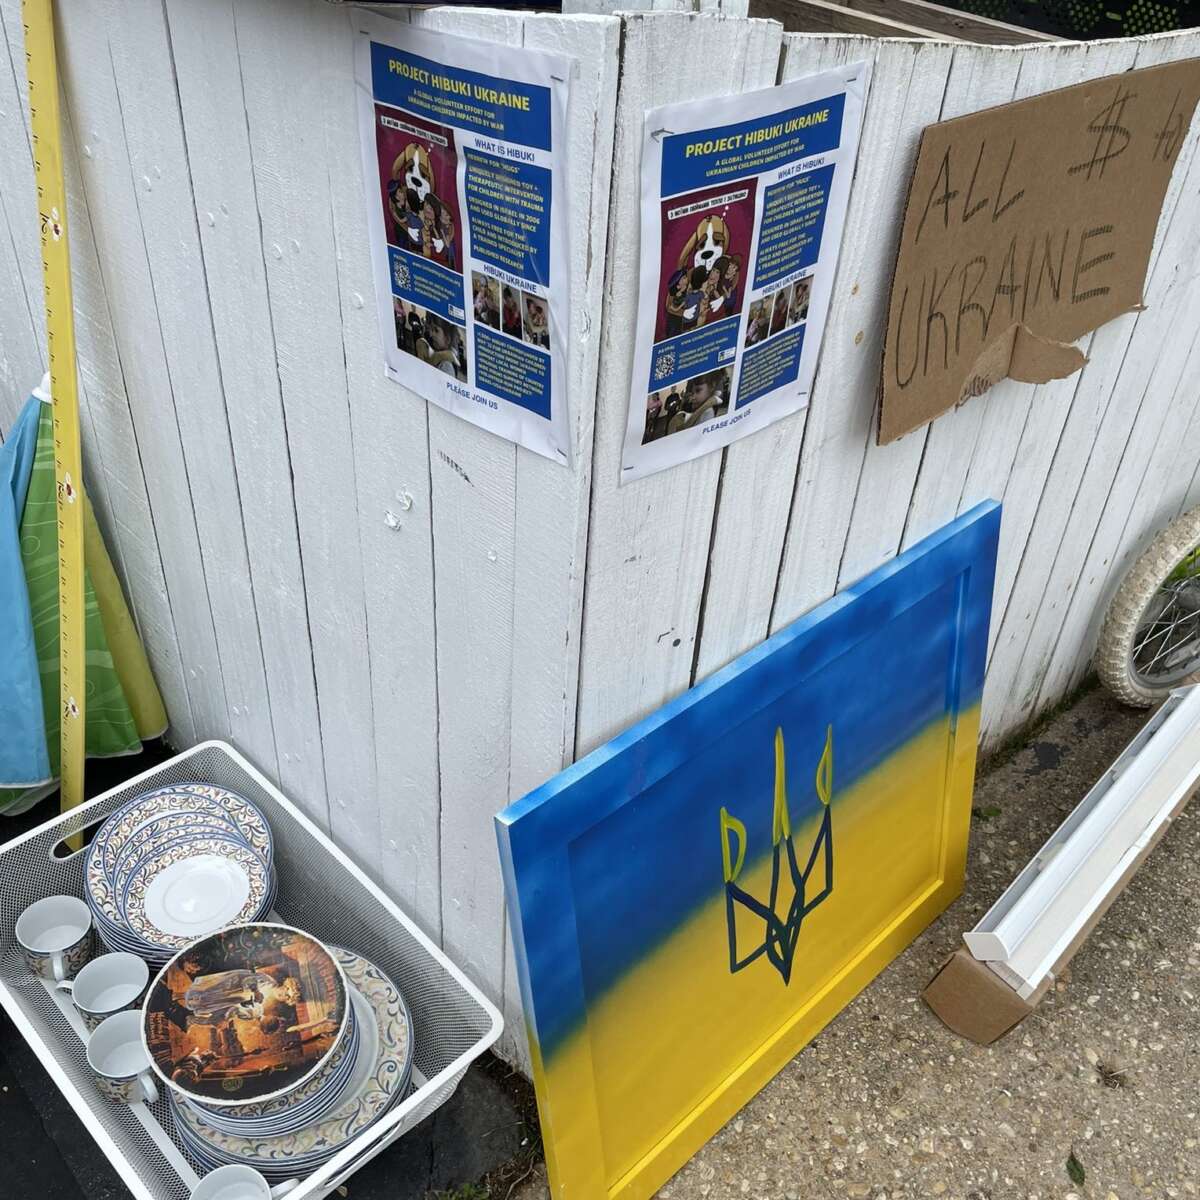 Arlington residents turn out at local yard sale to raise money for Ukrainian children